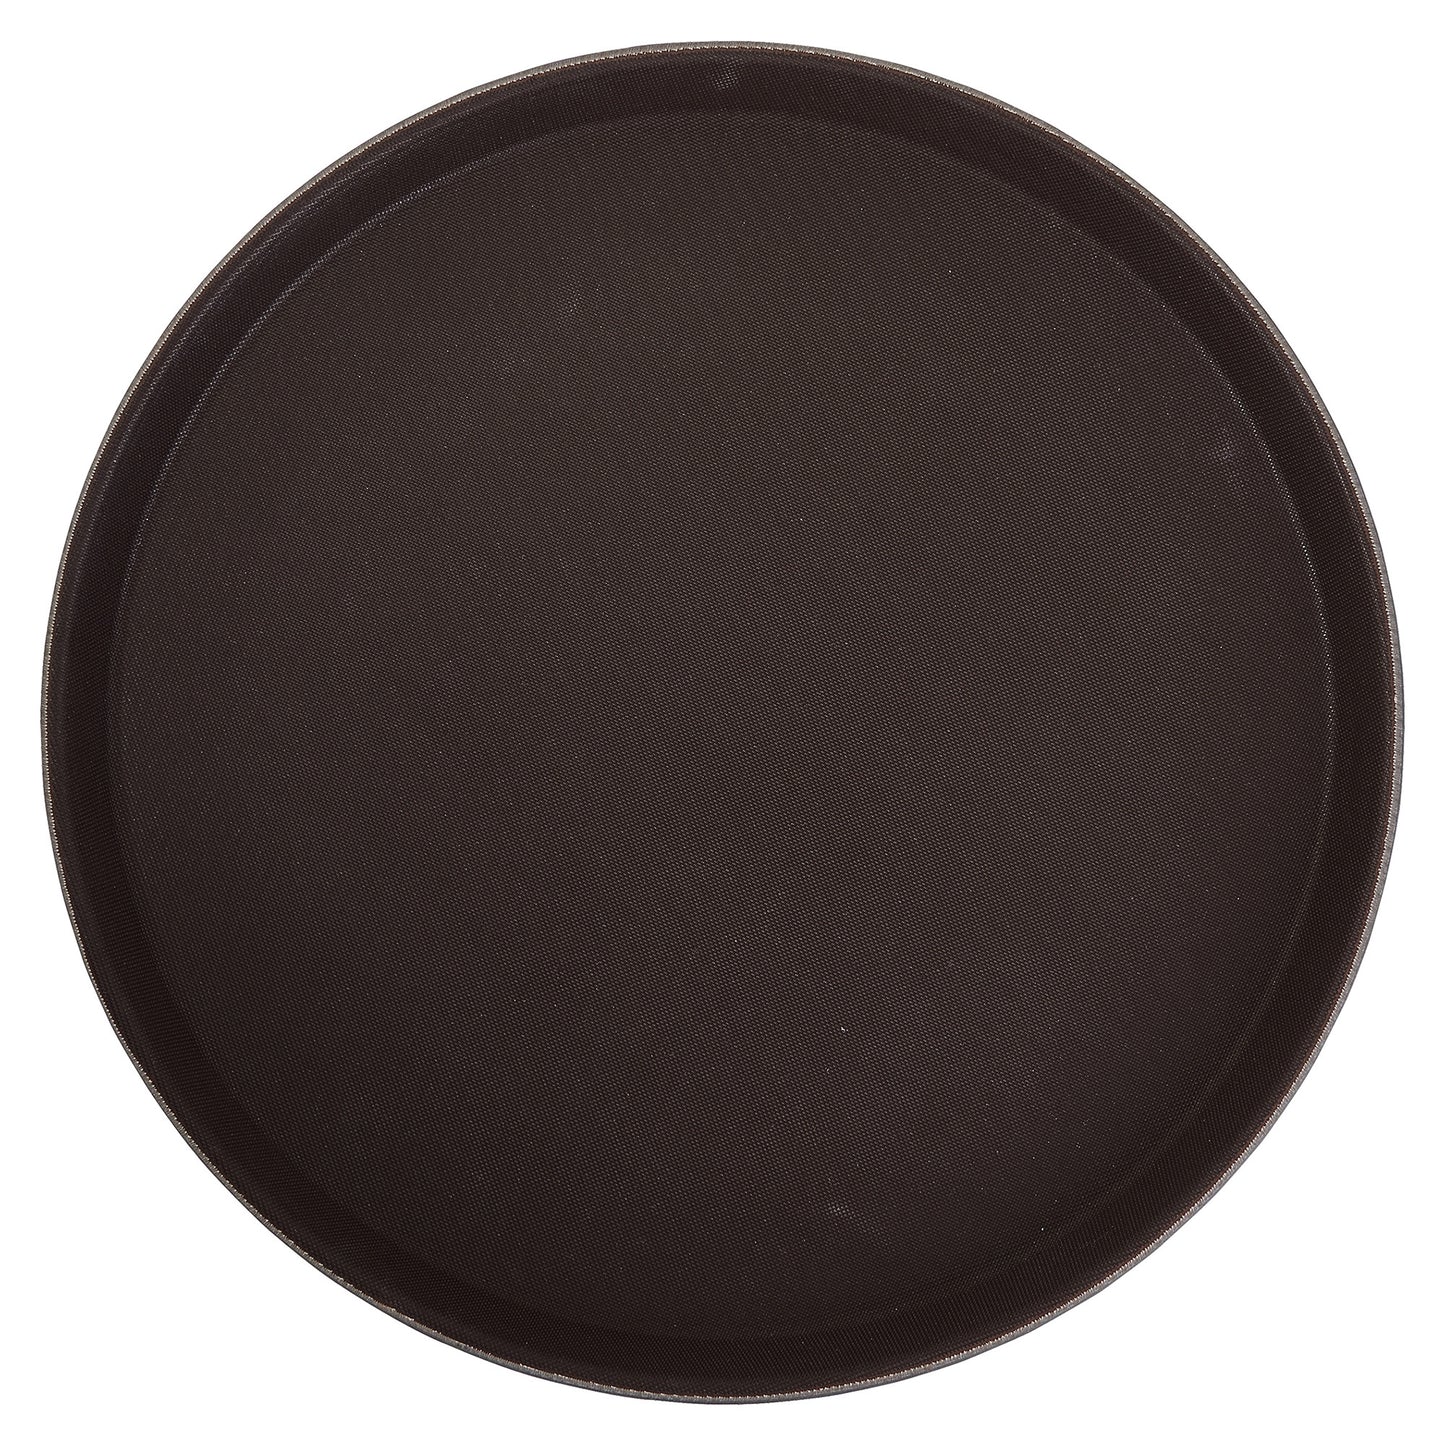 Easy-Hold 11" Round Rubber-Lined Plastic Tray